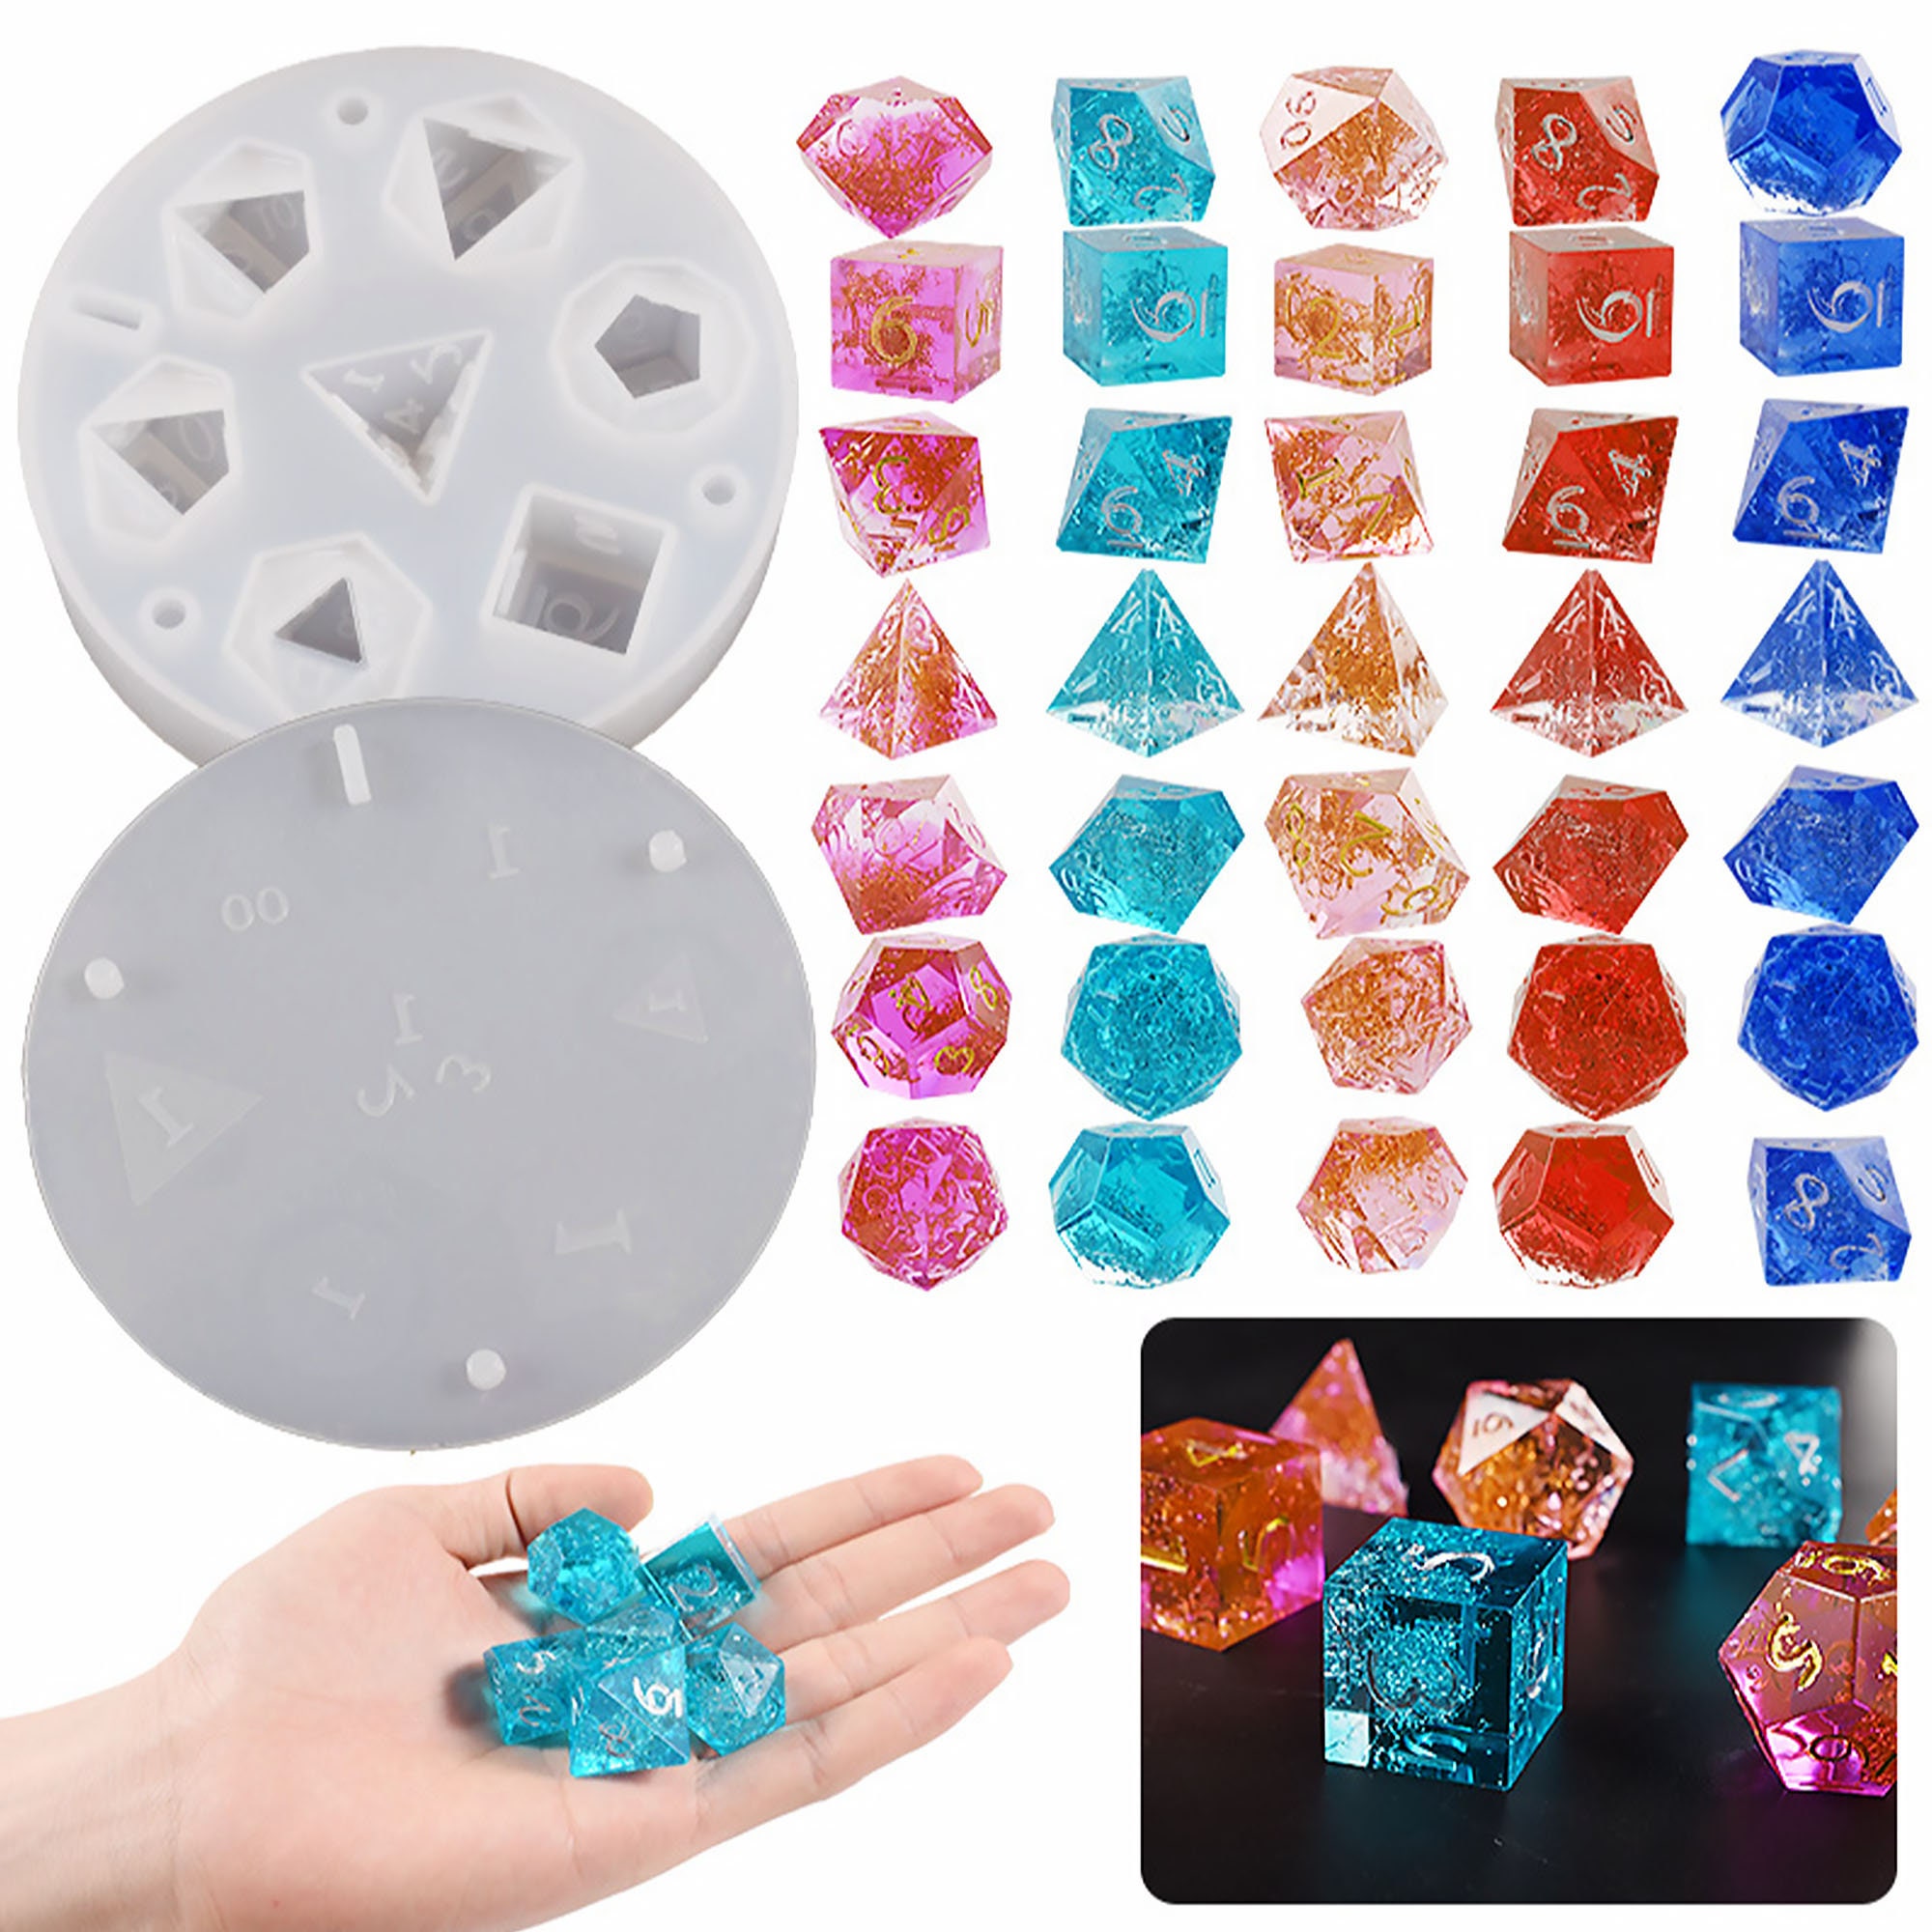 Migugaga DND Dice Mold for Resin Casting, Sharp Edge D&D Silicone Dice Molds with 36pcs Dice Making Kit, Personalized Silicone DND Dice Molds for